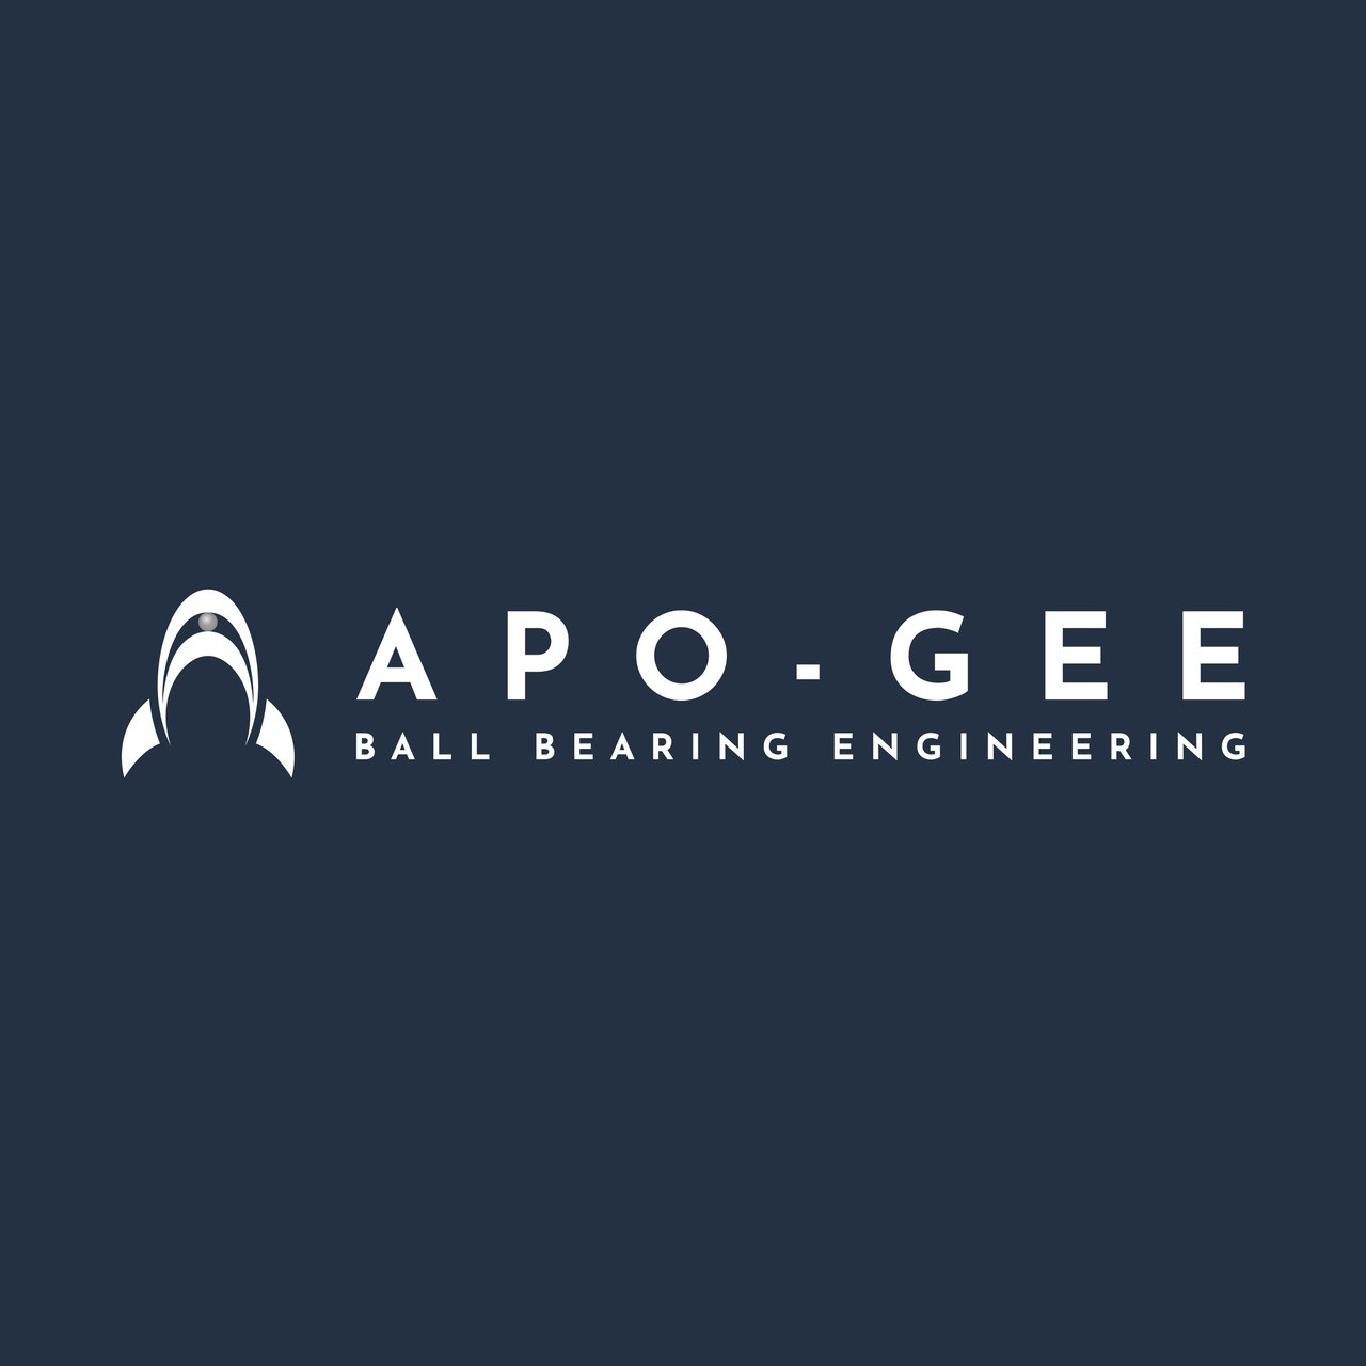 ApoGee pioneers groundbreaking solutions for aerospace bearings, solving longstanding challenges and setting new standards for performance and reliability.